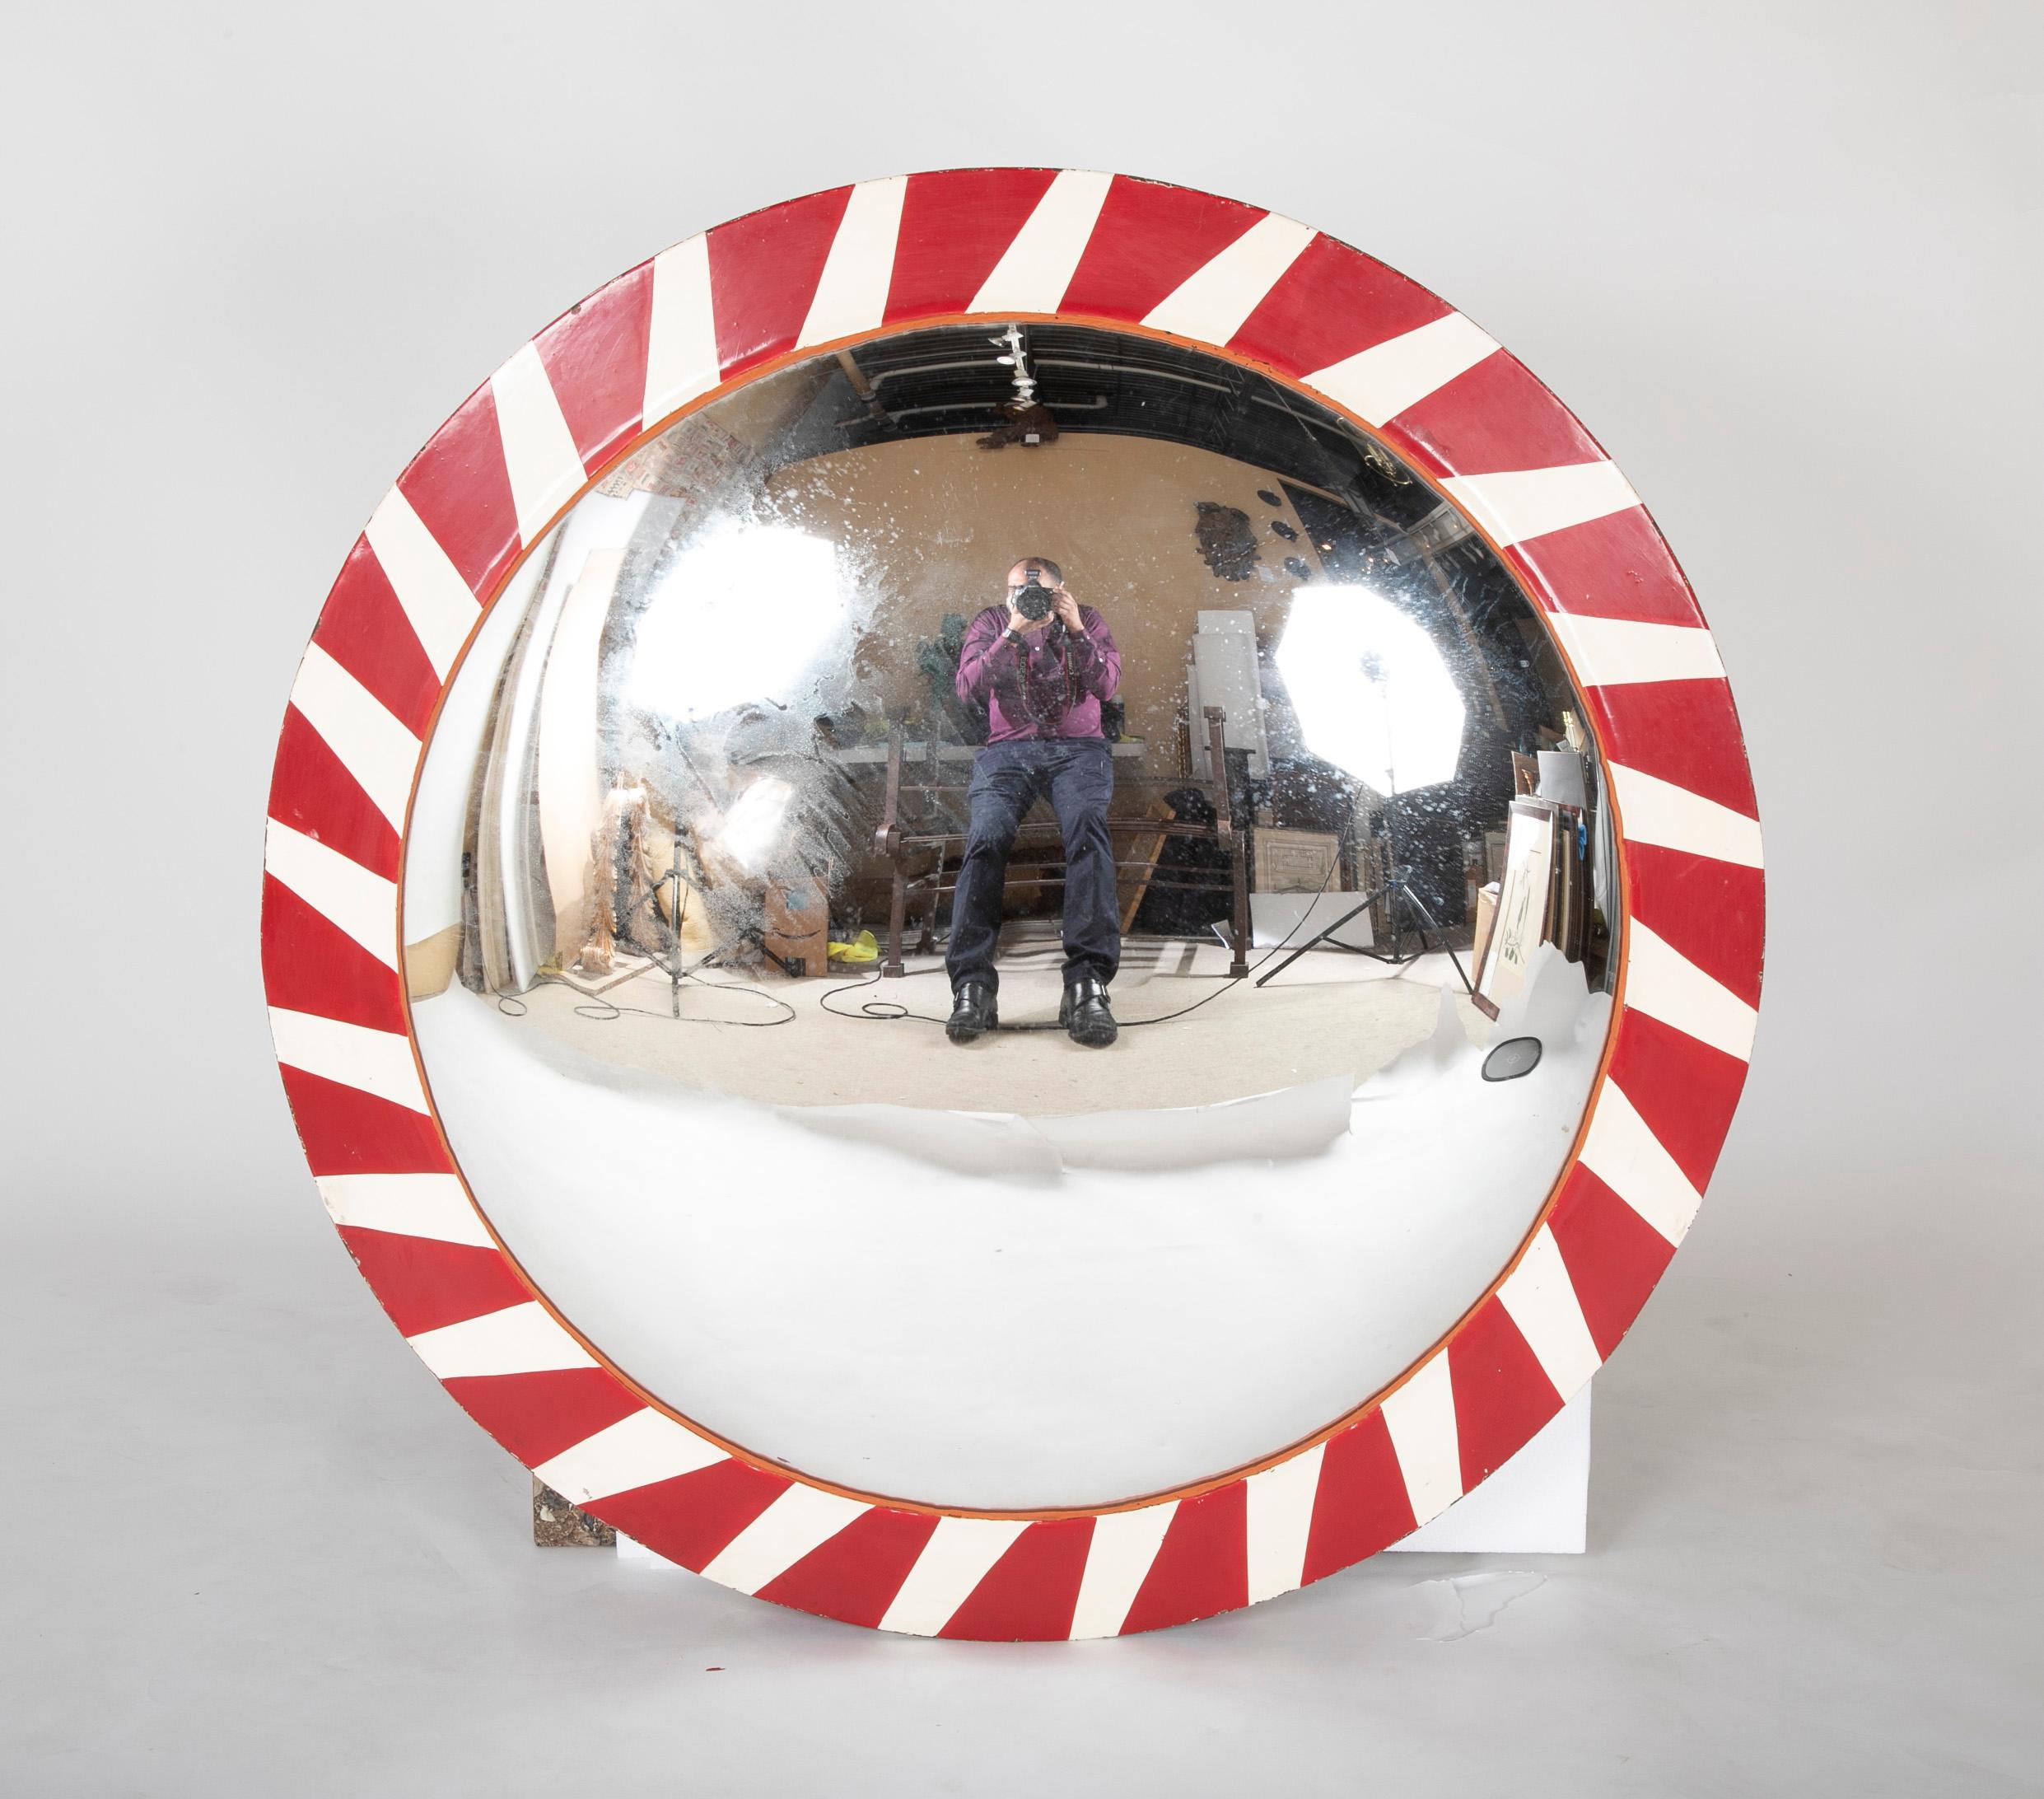 Unusual and very cool convex mirror in a steel frame painted with red and white stripes, said to come from a railroad in Belgium. The grand scale and novel coloring make this a singular decorative element.
Measures: 45 inches diameter, 4 inches